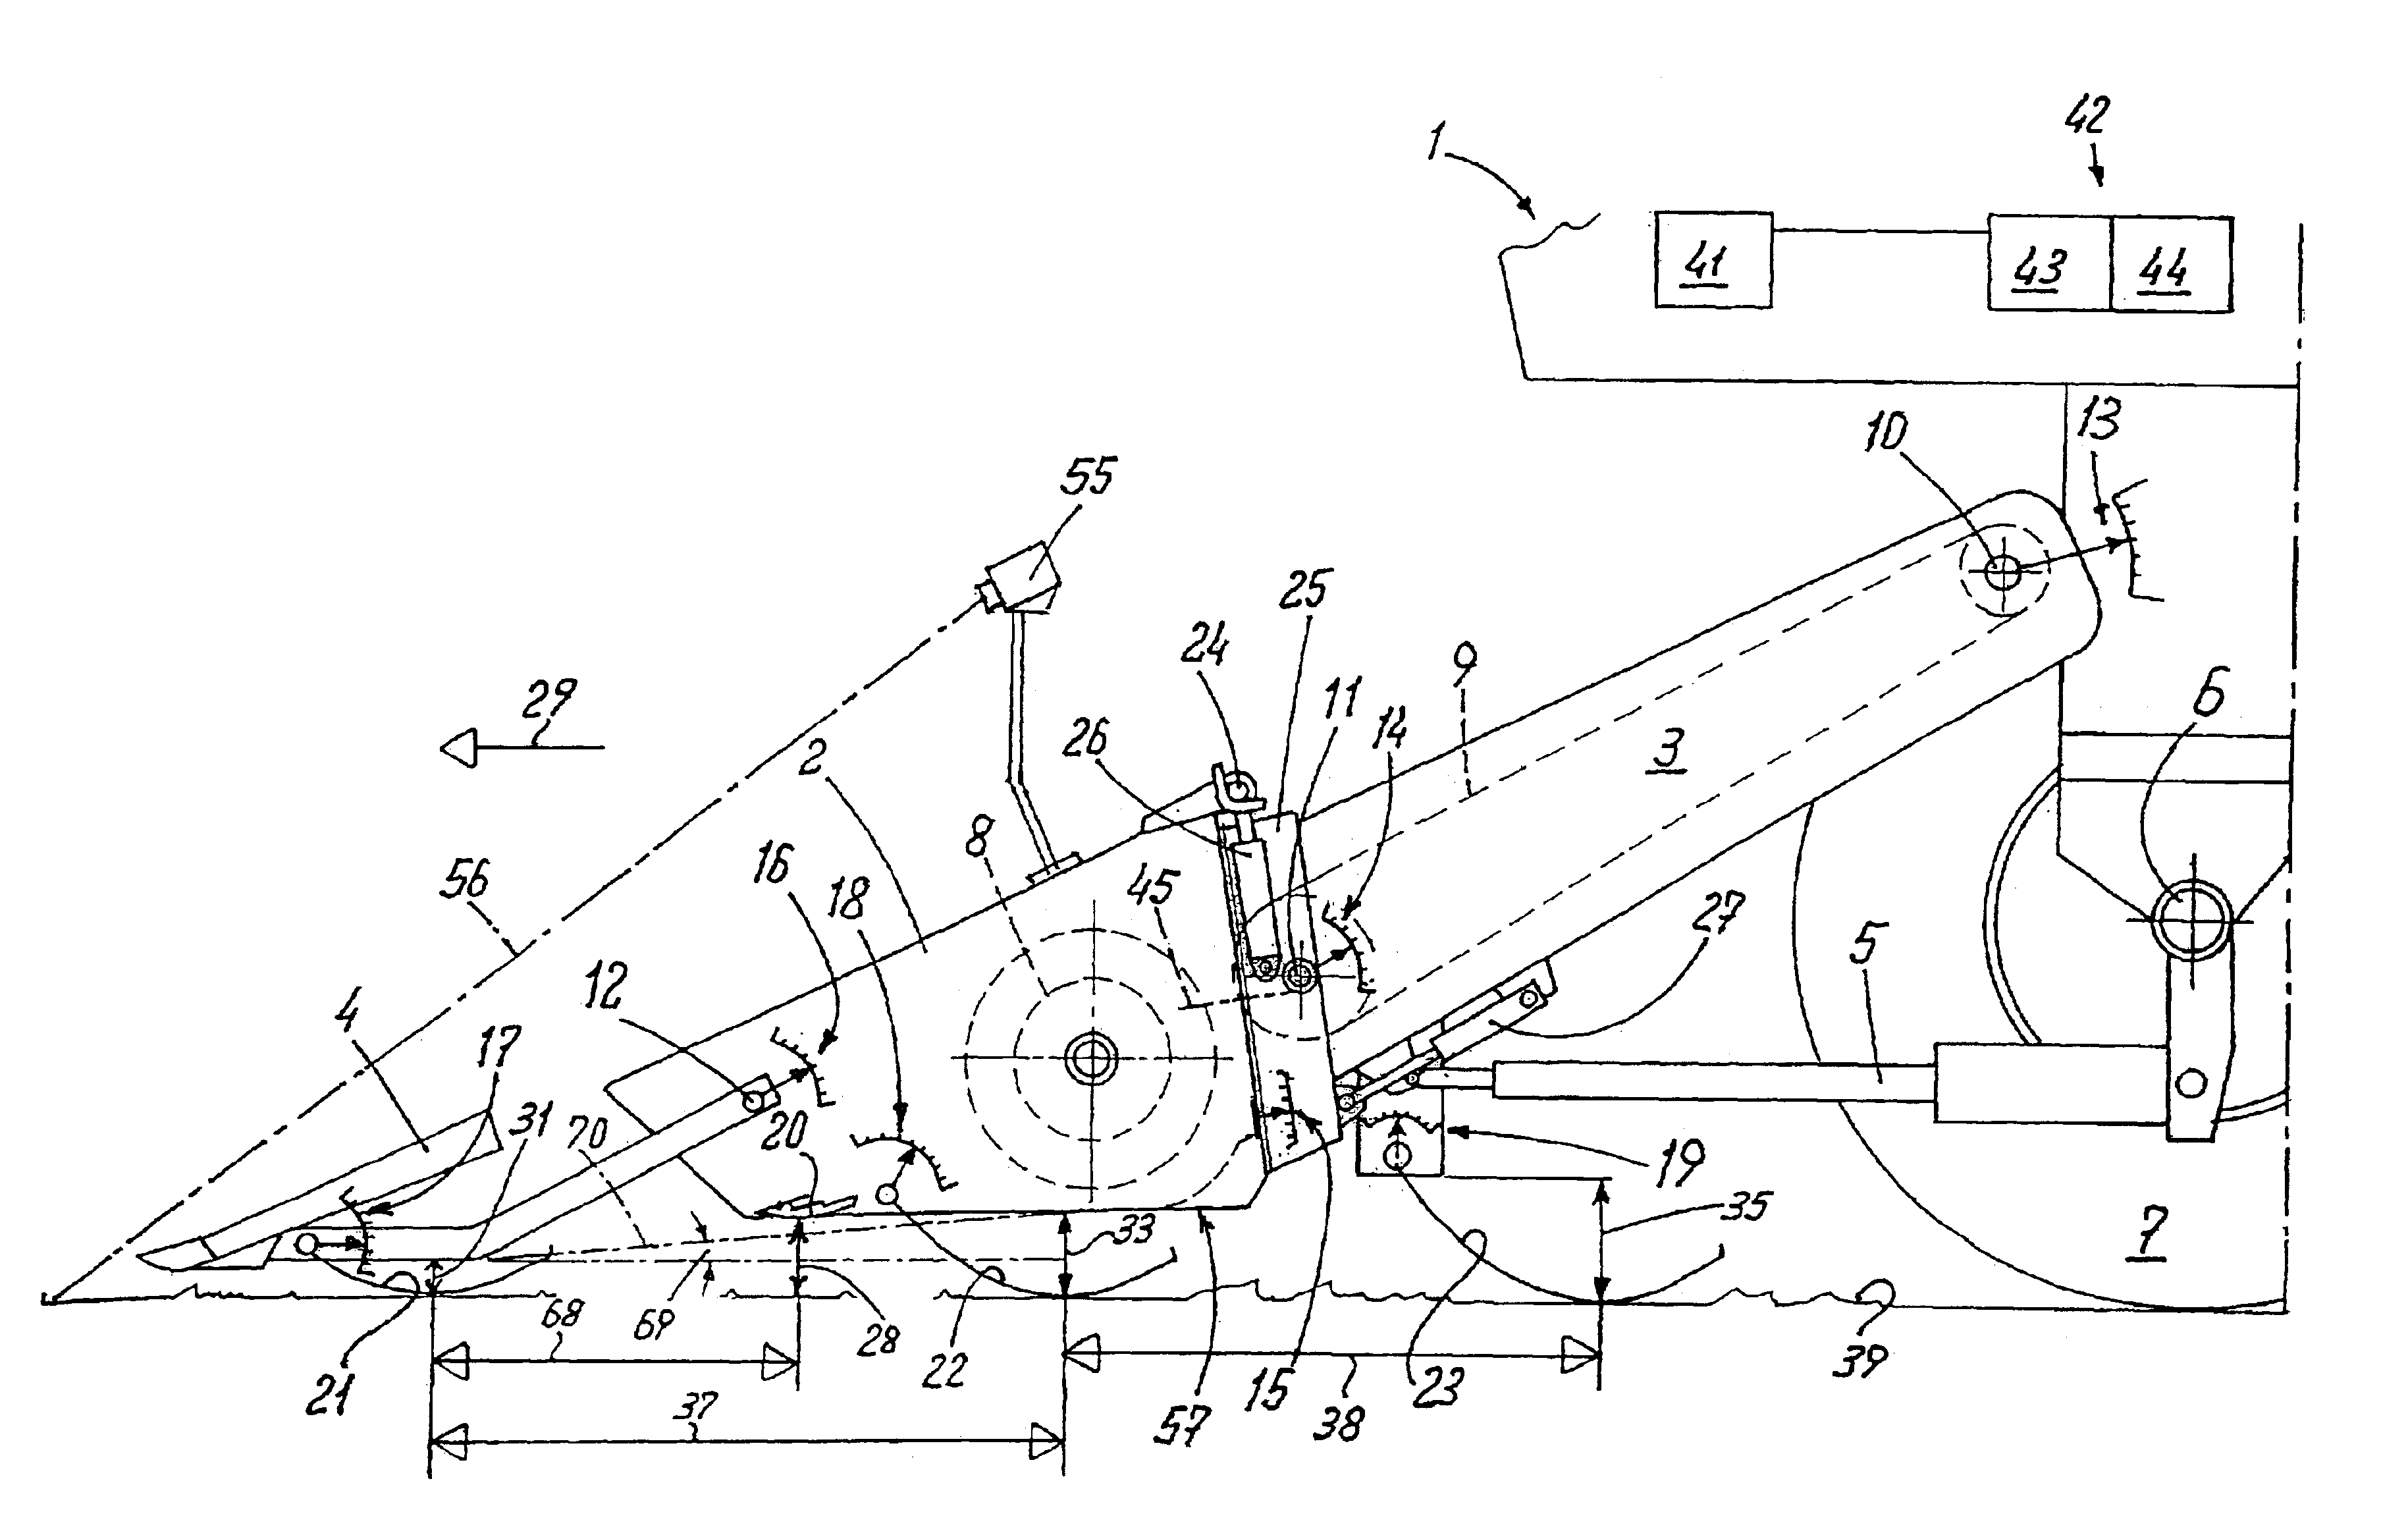 Position control for a crop pickup device